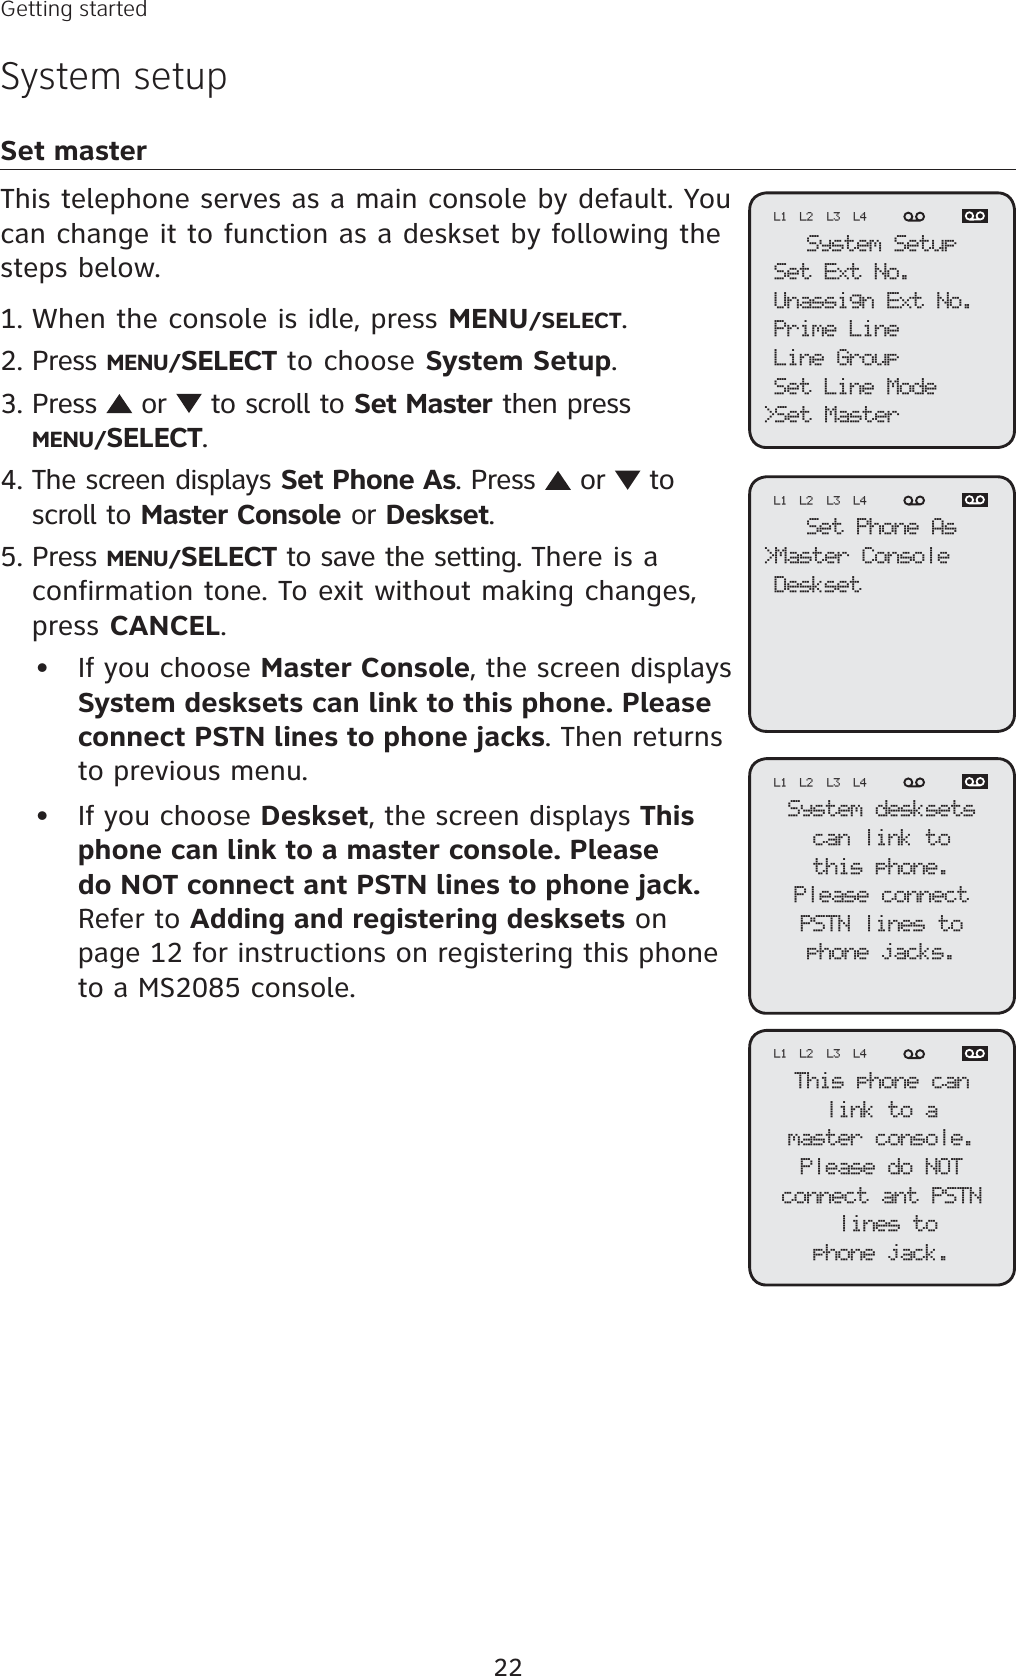 22Getting startedSystem setupSet masterThis telephone serves as a main console by default. You can change it to function as a deskset by following the steps below. When the console is idle, press MENU/SELECT.Press MENU/SELECT to choose System Setup.Press   or   to scroll to Set Master then pressMENU/SELECT.The screen displays Set Phone As. Press   or   to scroll to Master Console or Deskset.Press MENU/SELECT to save the setting. There is a confirmation tone. To exit without making changes, press CANCEL.If you choose Master Console, the screen displays System desksets can link to this phone. Please connect PSTN lines to phone jacks. Then returns to previous menu. If you choose Deskset, the screen displays Thisphone can link to a master console. Please do NOT connect ant PSTN lines to phone jack.Refer to Adding and registering desksets on page 12 for instructions on registering this phone to a MS2085 console.1.2.3.4.5.••System SetupSet Ext No.Unassign Ext No.Prime LineLine GroupSet Line Mode&gt;Set MasterL1 L2 L3 L4Set Phone As&gt;Master ConsoleDesksetL1 L2 L3 L4System desksetscan link tothis phone.Please connectPSTN lines tophone jacks.L1 L2 L3 L4This phone canlink to amaster console.Please do NOT connect ant PSTN lines to phone jack.L1 L2 L3 L4